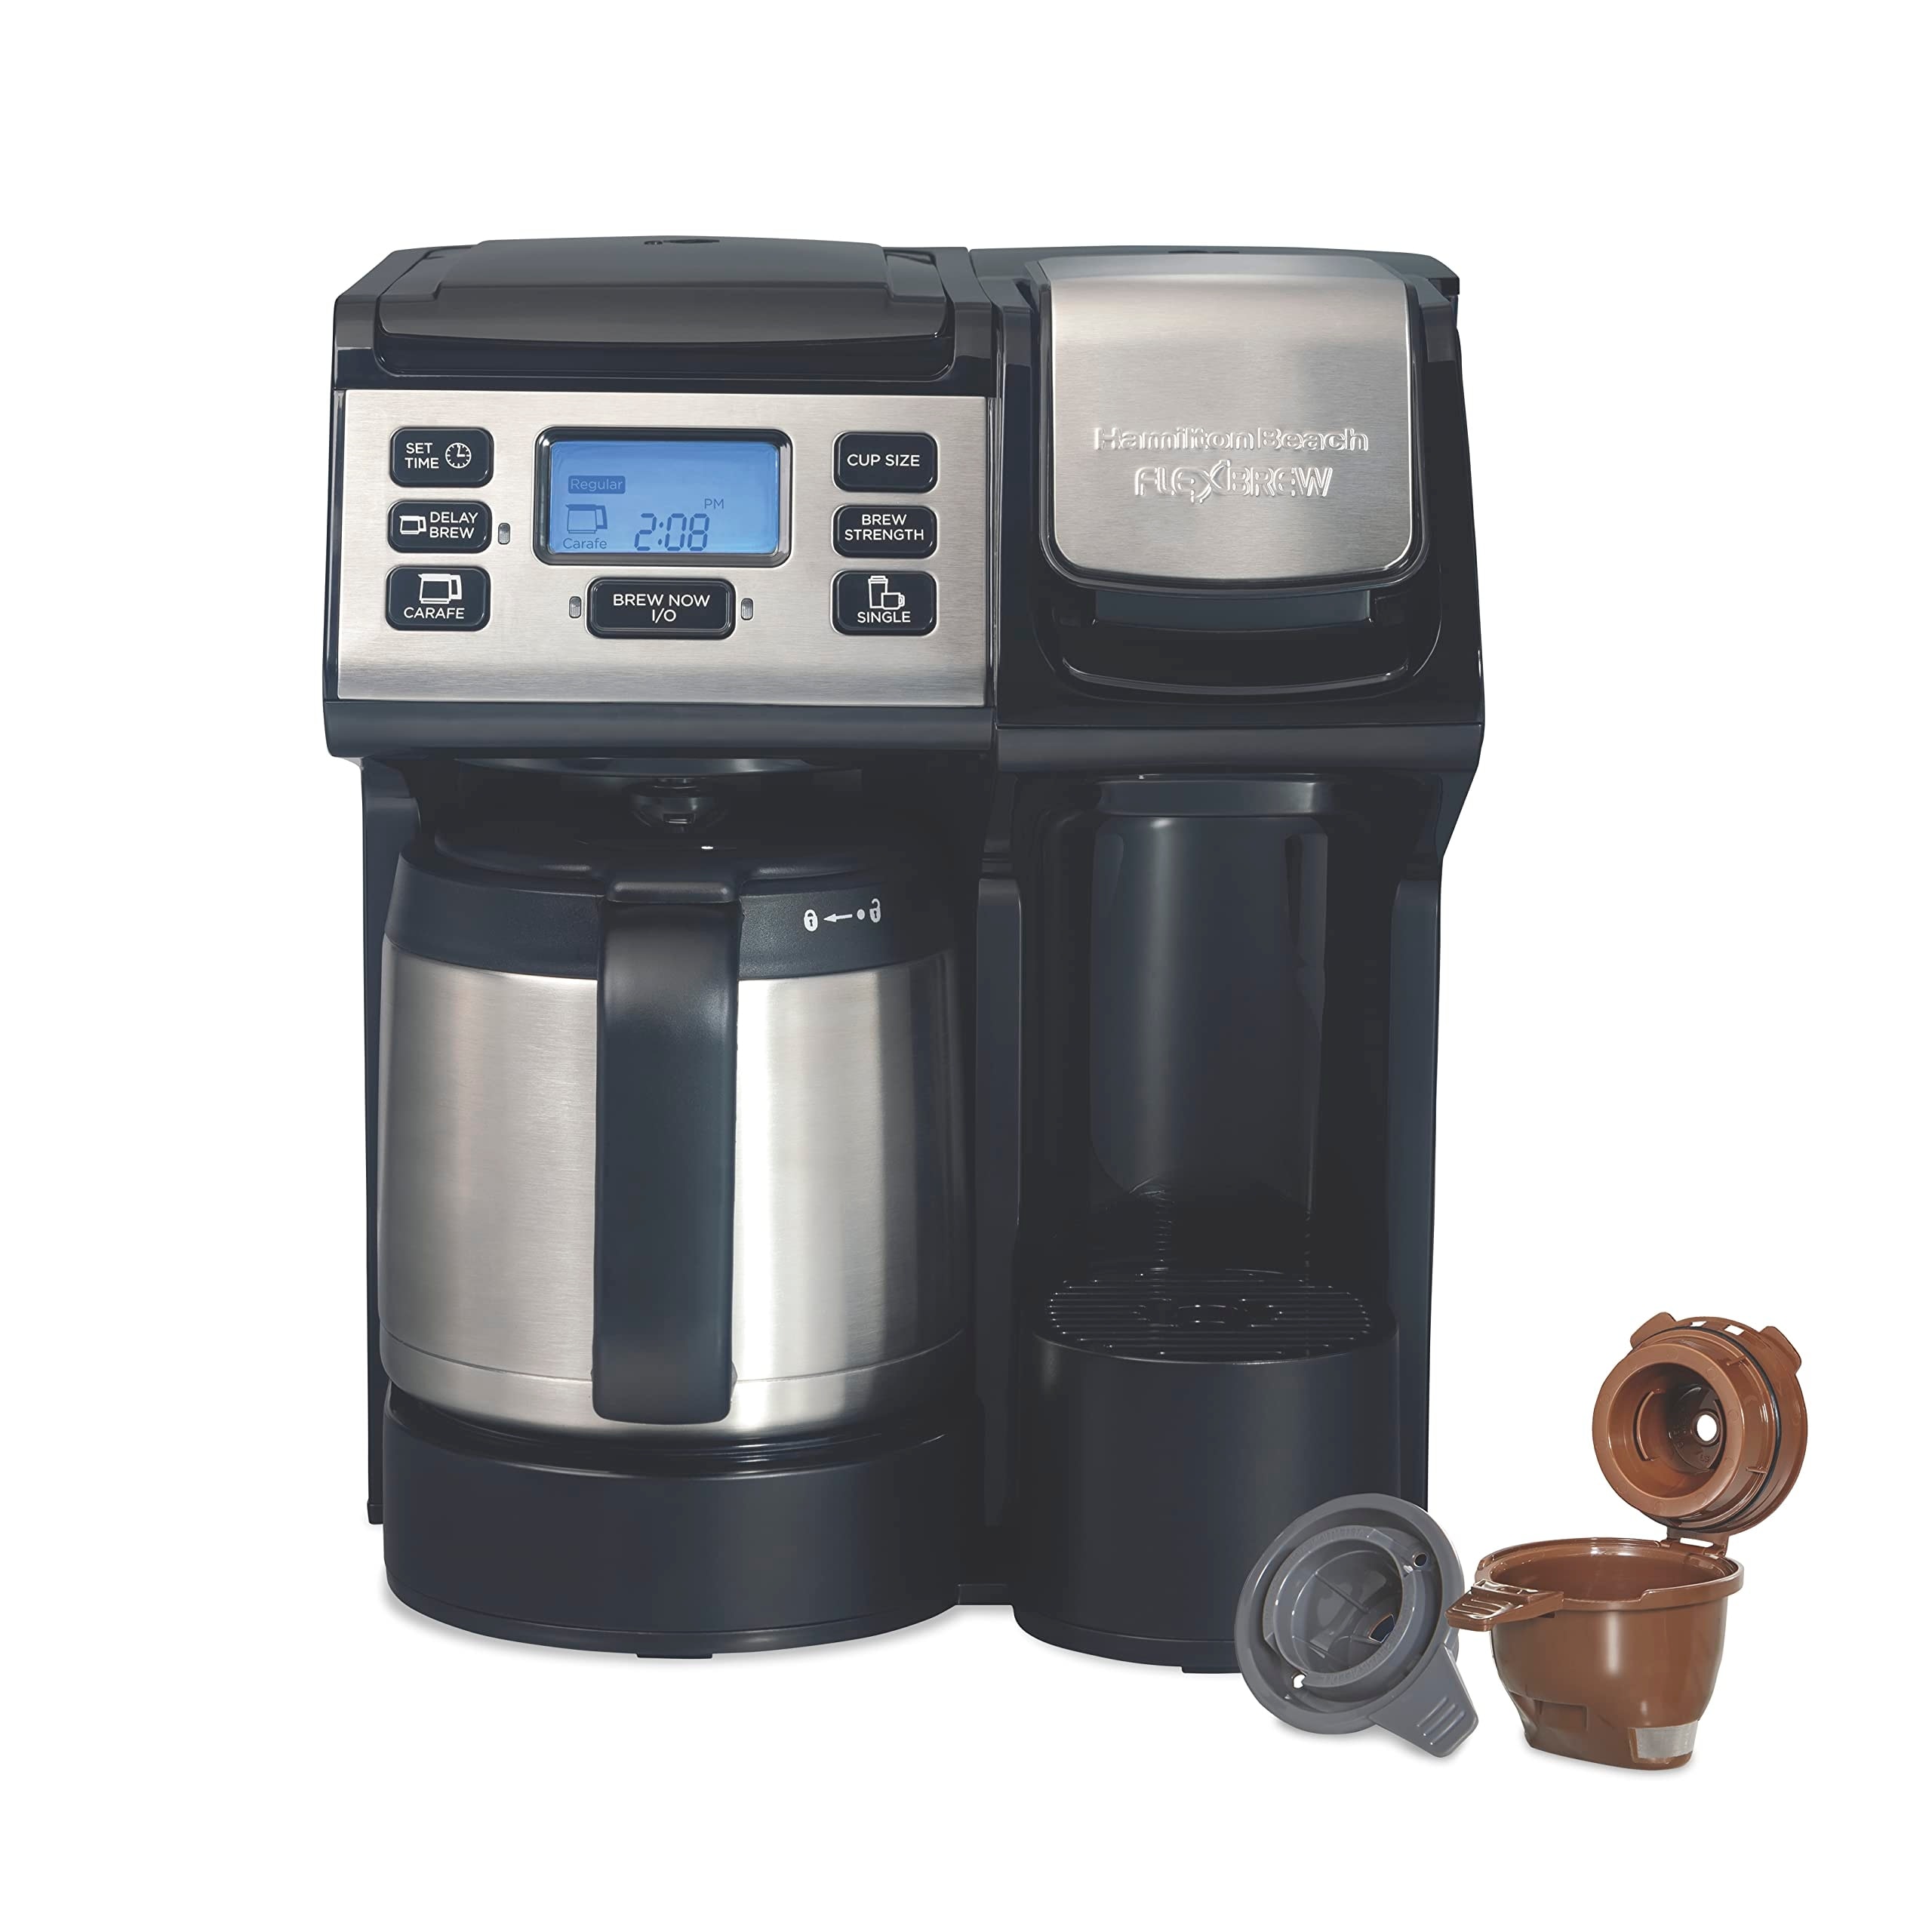 2-Way Coffee Maker, Compatible with K-Cup Pods or Grounds, Combo